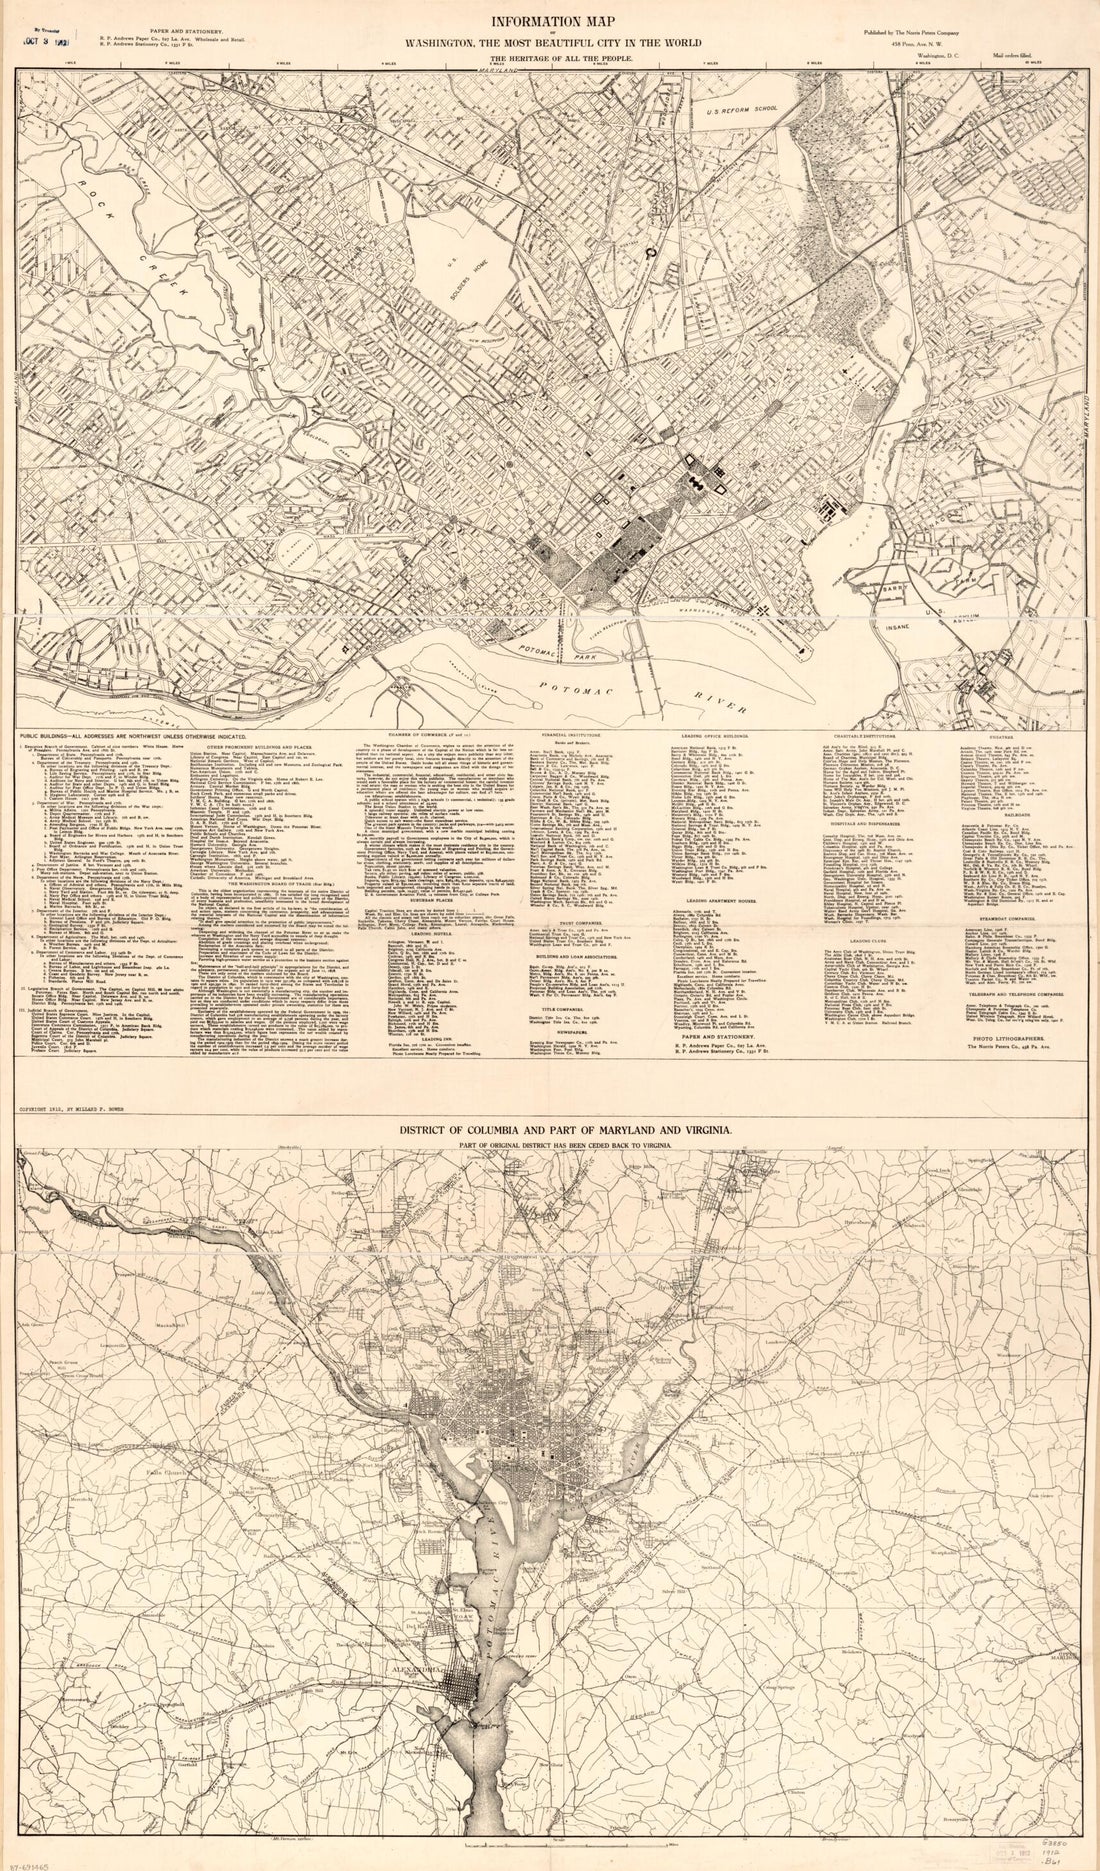 This old map of Information Map of Washington, the Most Beautiful City In the World : the Heritage of All the People ; District of Columbia and Part of Maryland and Virginia : Part of Original District Has Been Ceded Back to Virginia from 1912 was create